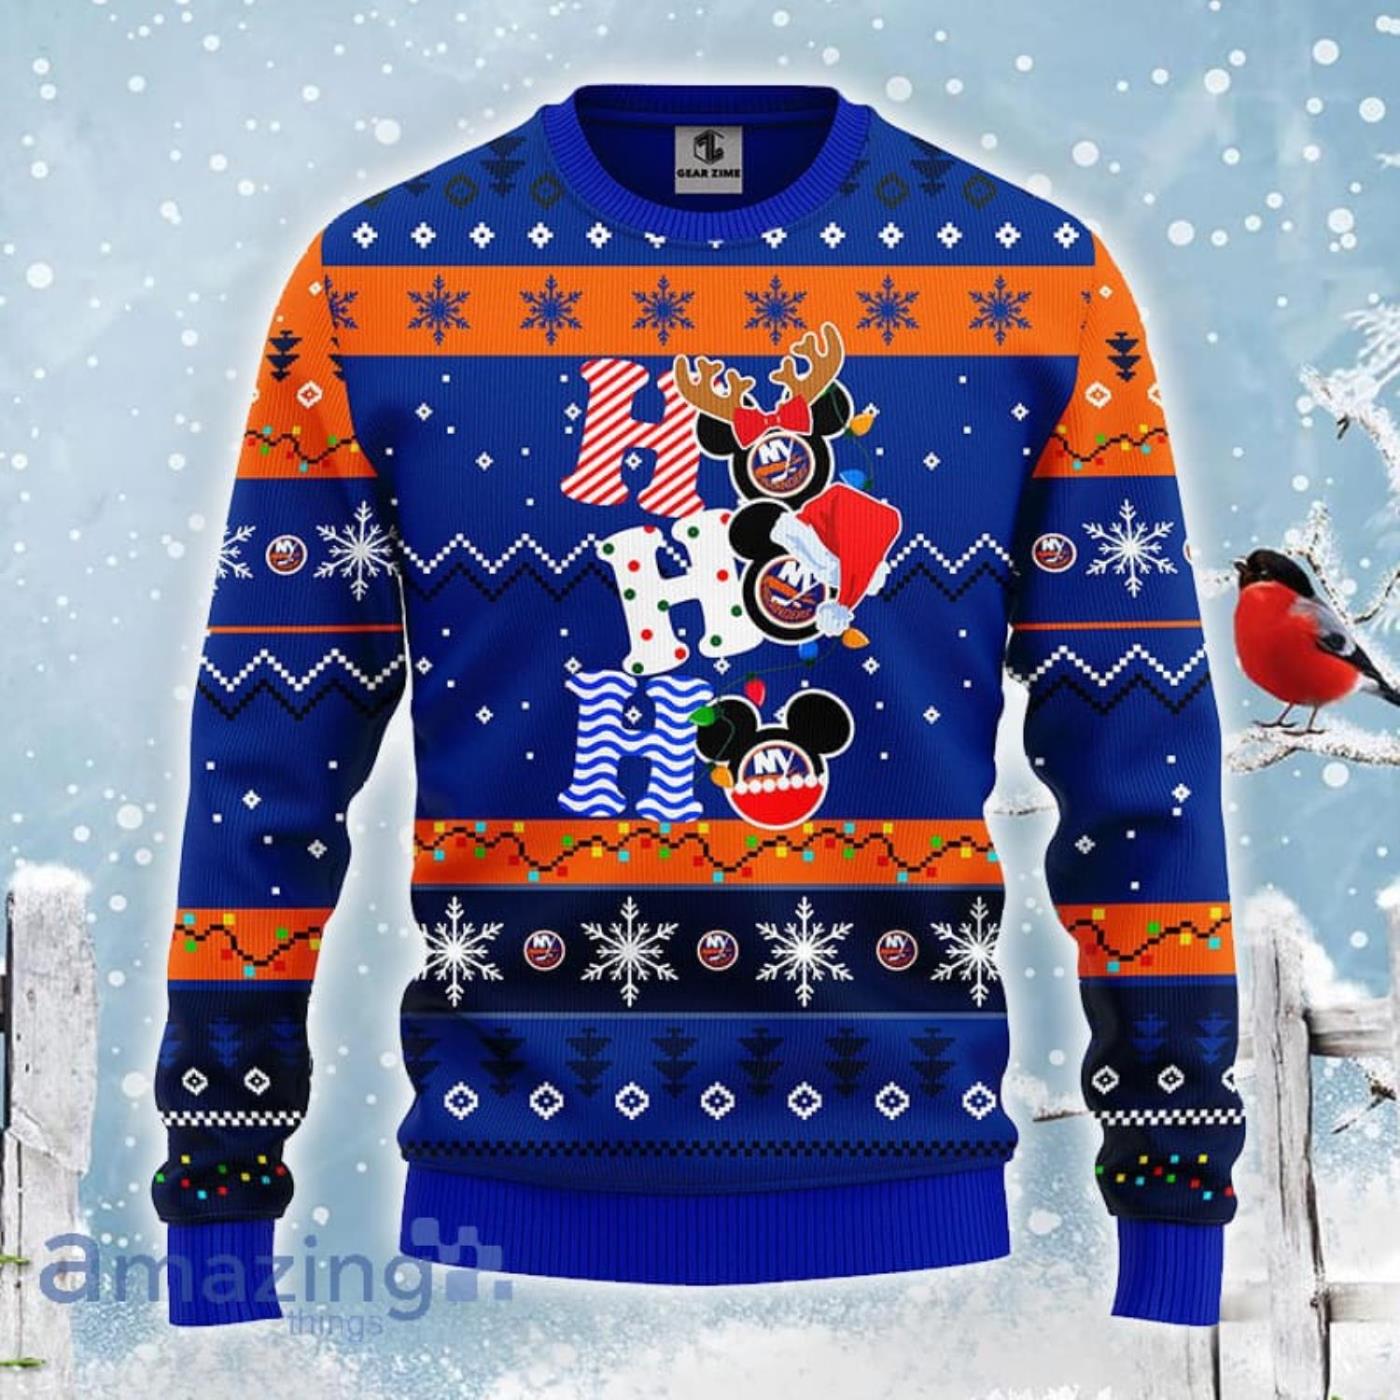 New York Islanders Mickey Mouse Champions Football Funny 3D Sweater For Men  And Women Gift Christmas - Banantees